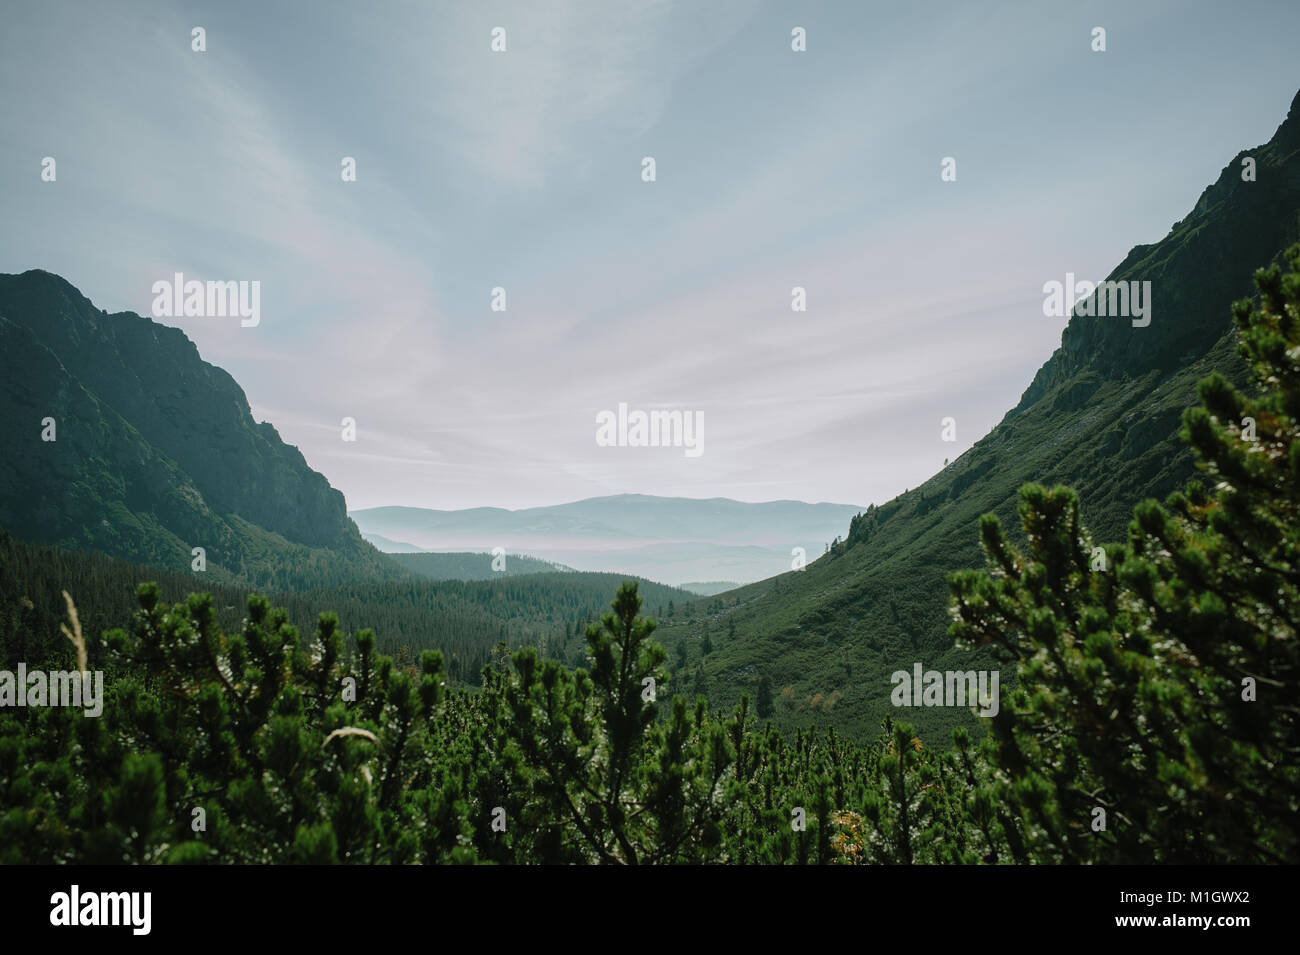 Green forest mountain valley of the High Tatras in Slovakia. Stock Photo